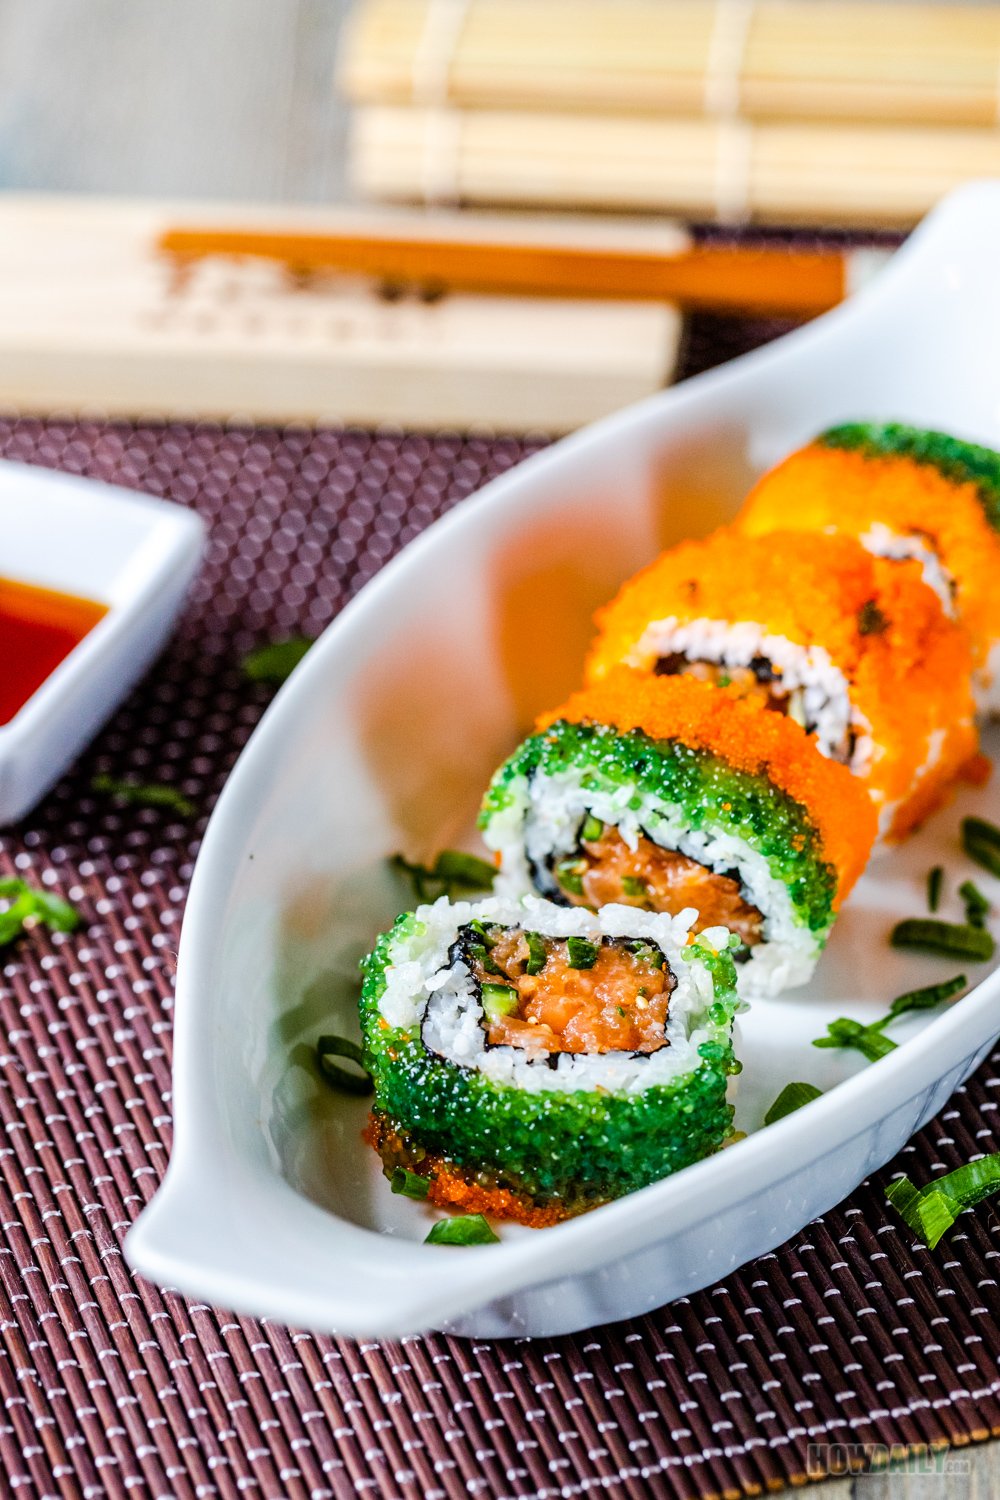 https://howdaily.com/wp-content/uploads/2021/02/Spicy-Salmon-Sushi-Roll.jpg